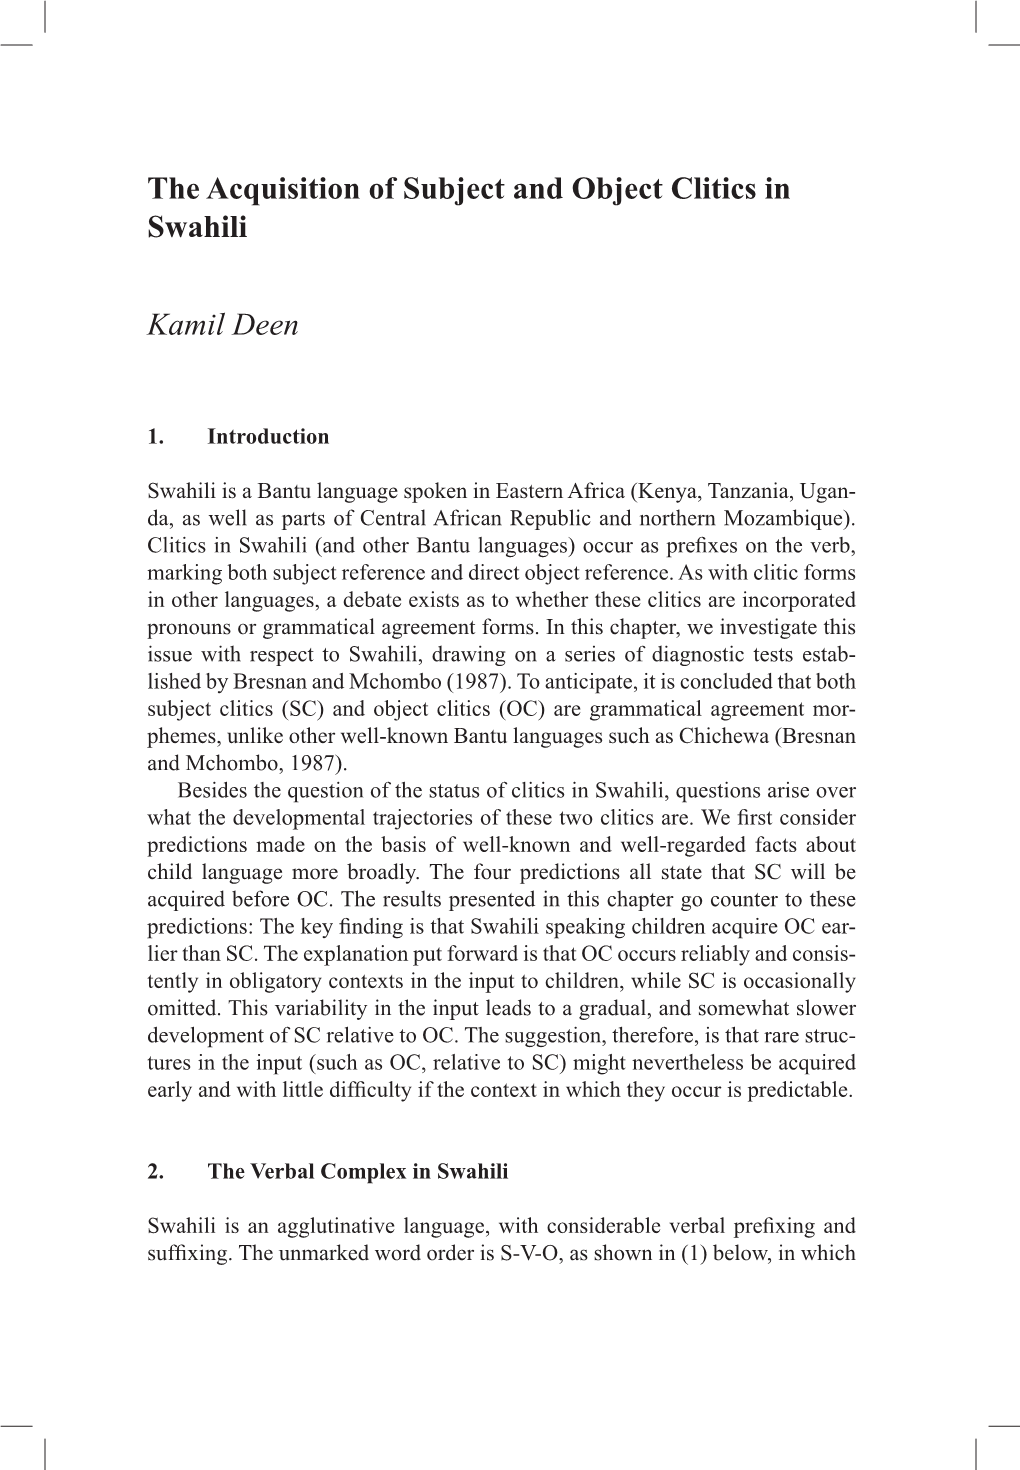 The Acquisition of Subject and Object Clitics in Swahili Kamil Deen